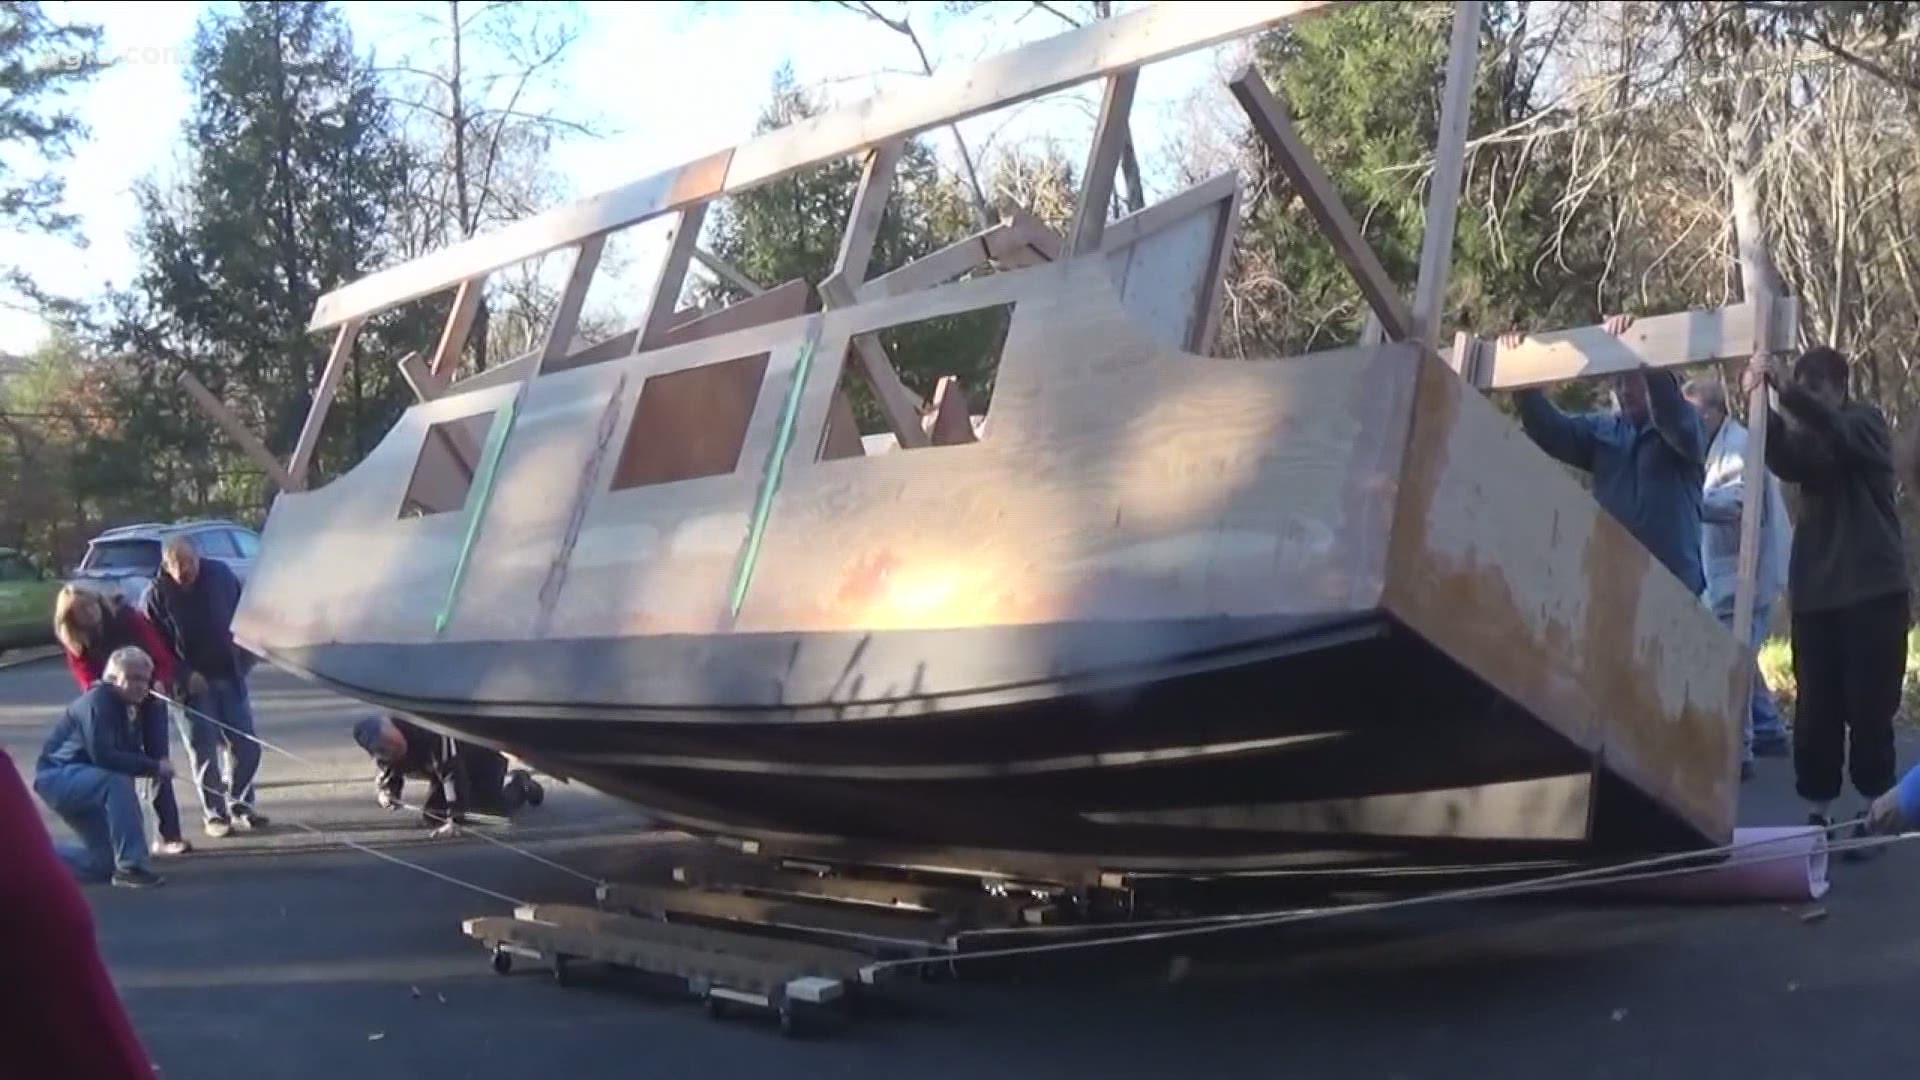 WNY man finishes passion project to build canal boat while battling cancer